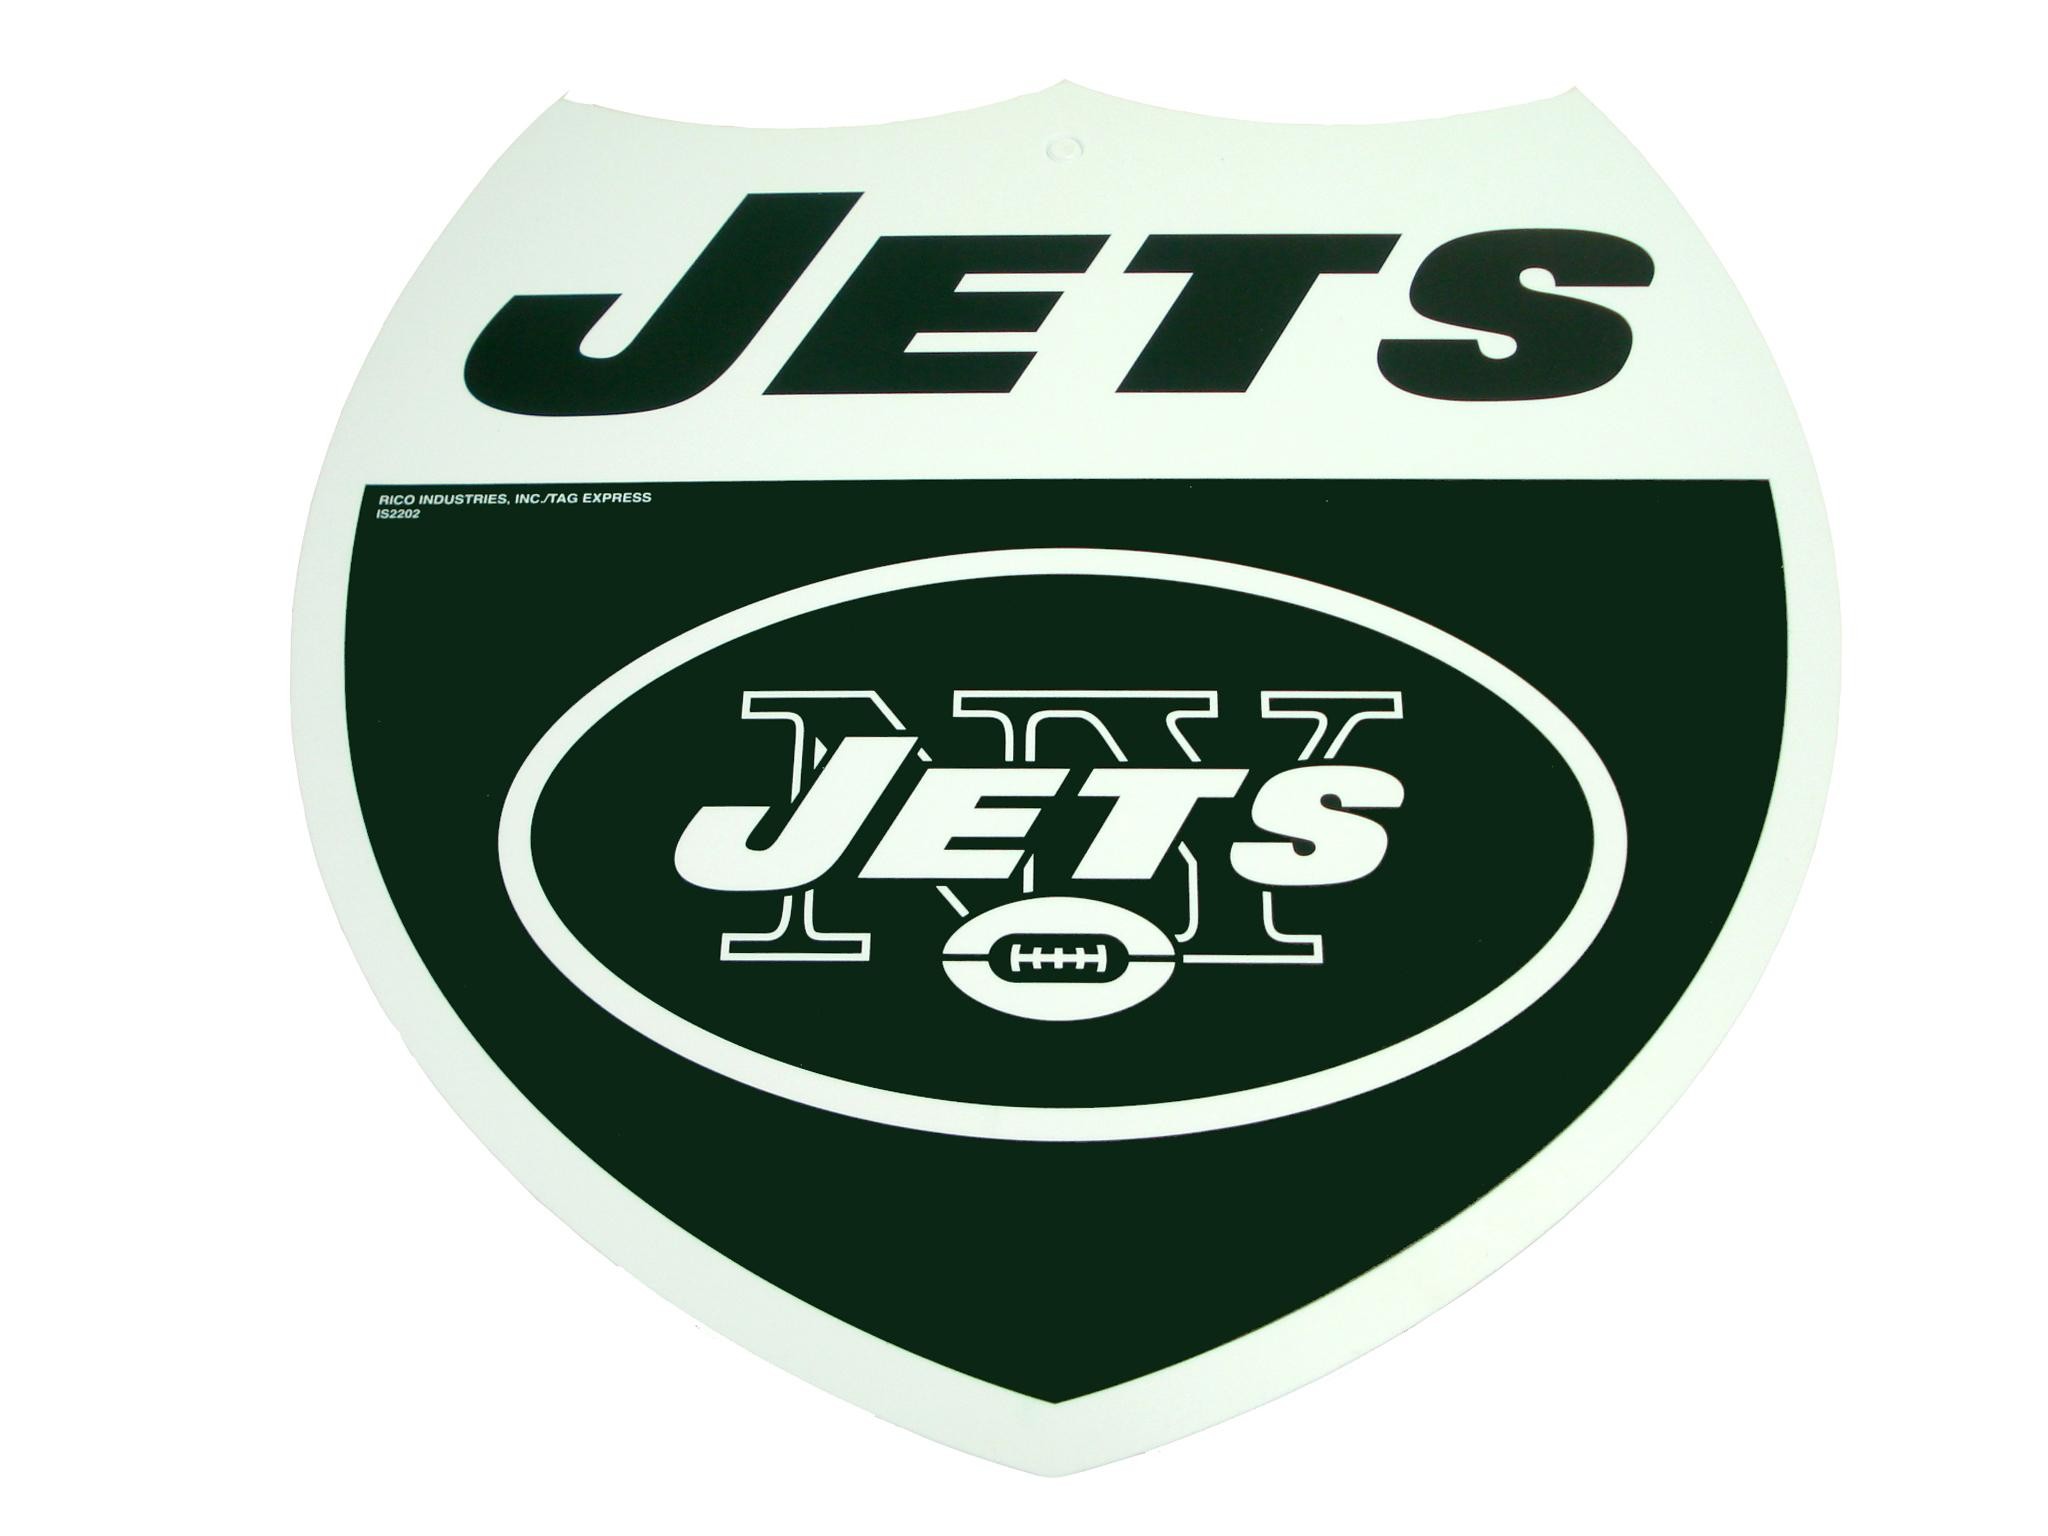 Ny Jets Wallpaper For Android Wallpaper for Mobile